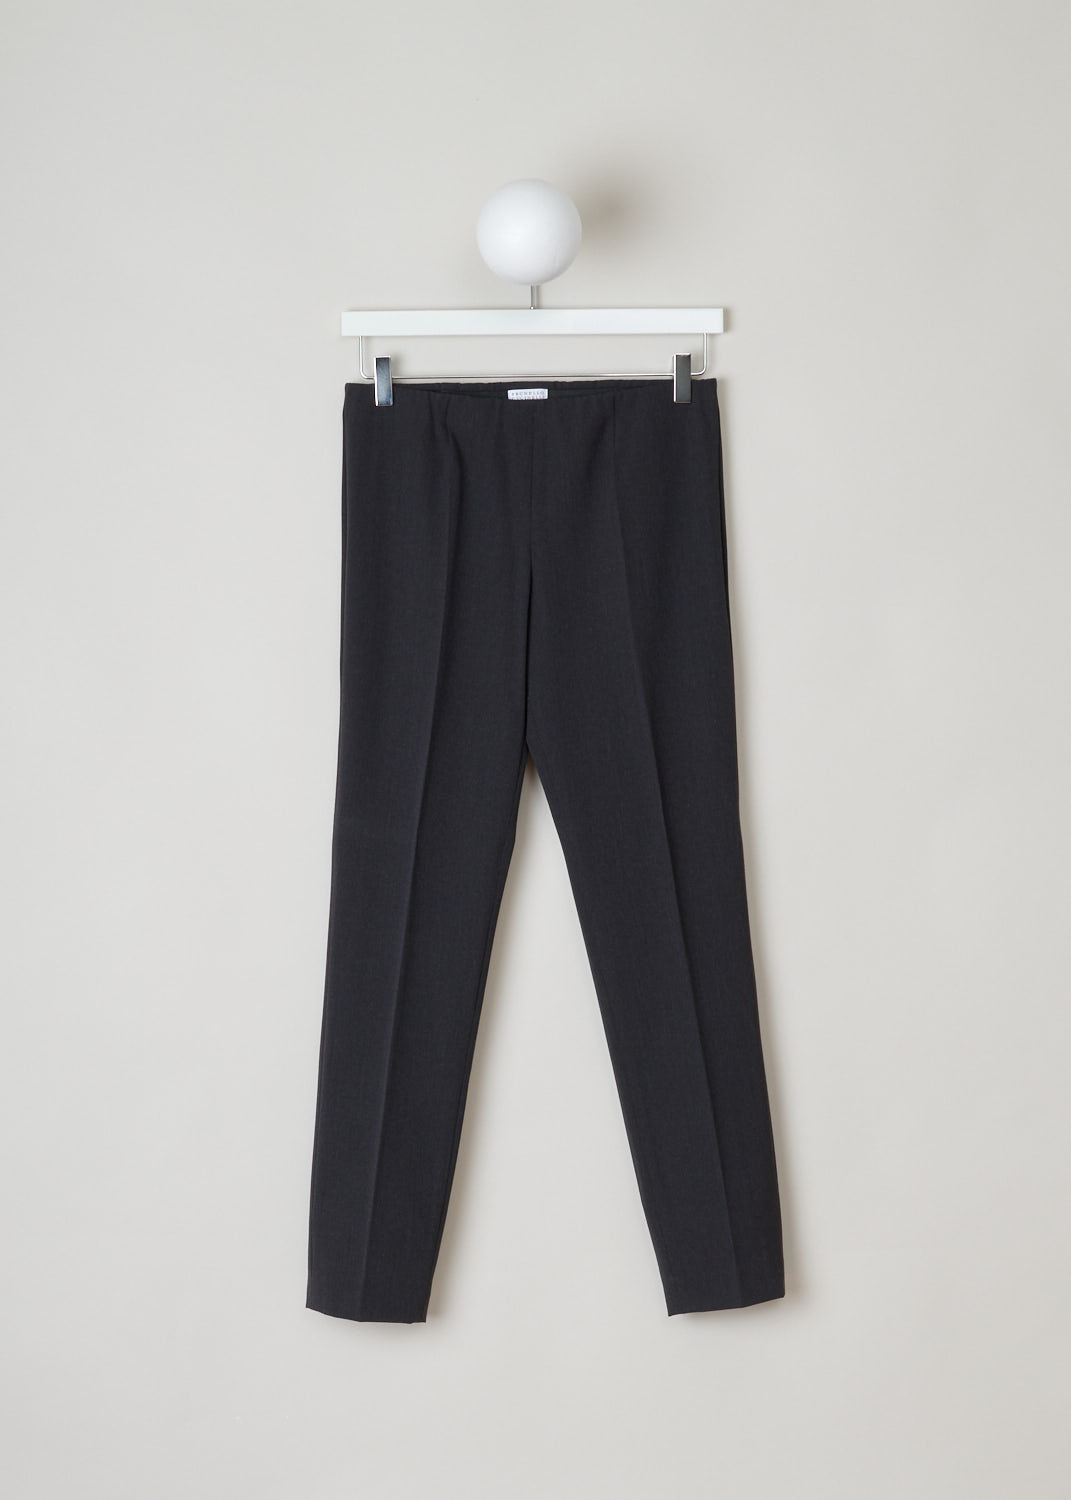 Brunello Cucinelli, straight charcoal pants, MA051P1794_C004, grey, front, Empower your outfit with these minimalistic designed pants. Comes in a lightweight wool in charcoal grey and midnight blue. These low-cut pants have a slim fit and slightly tapered legs.
A concealed elasticated waistband and closes with an invisible zip on the side.